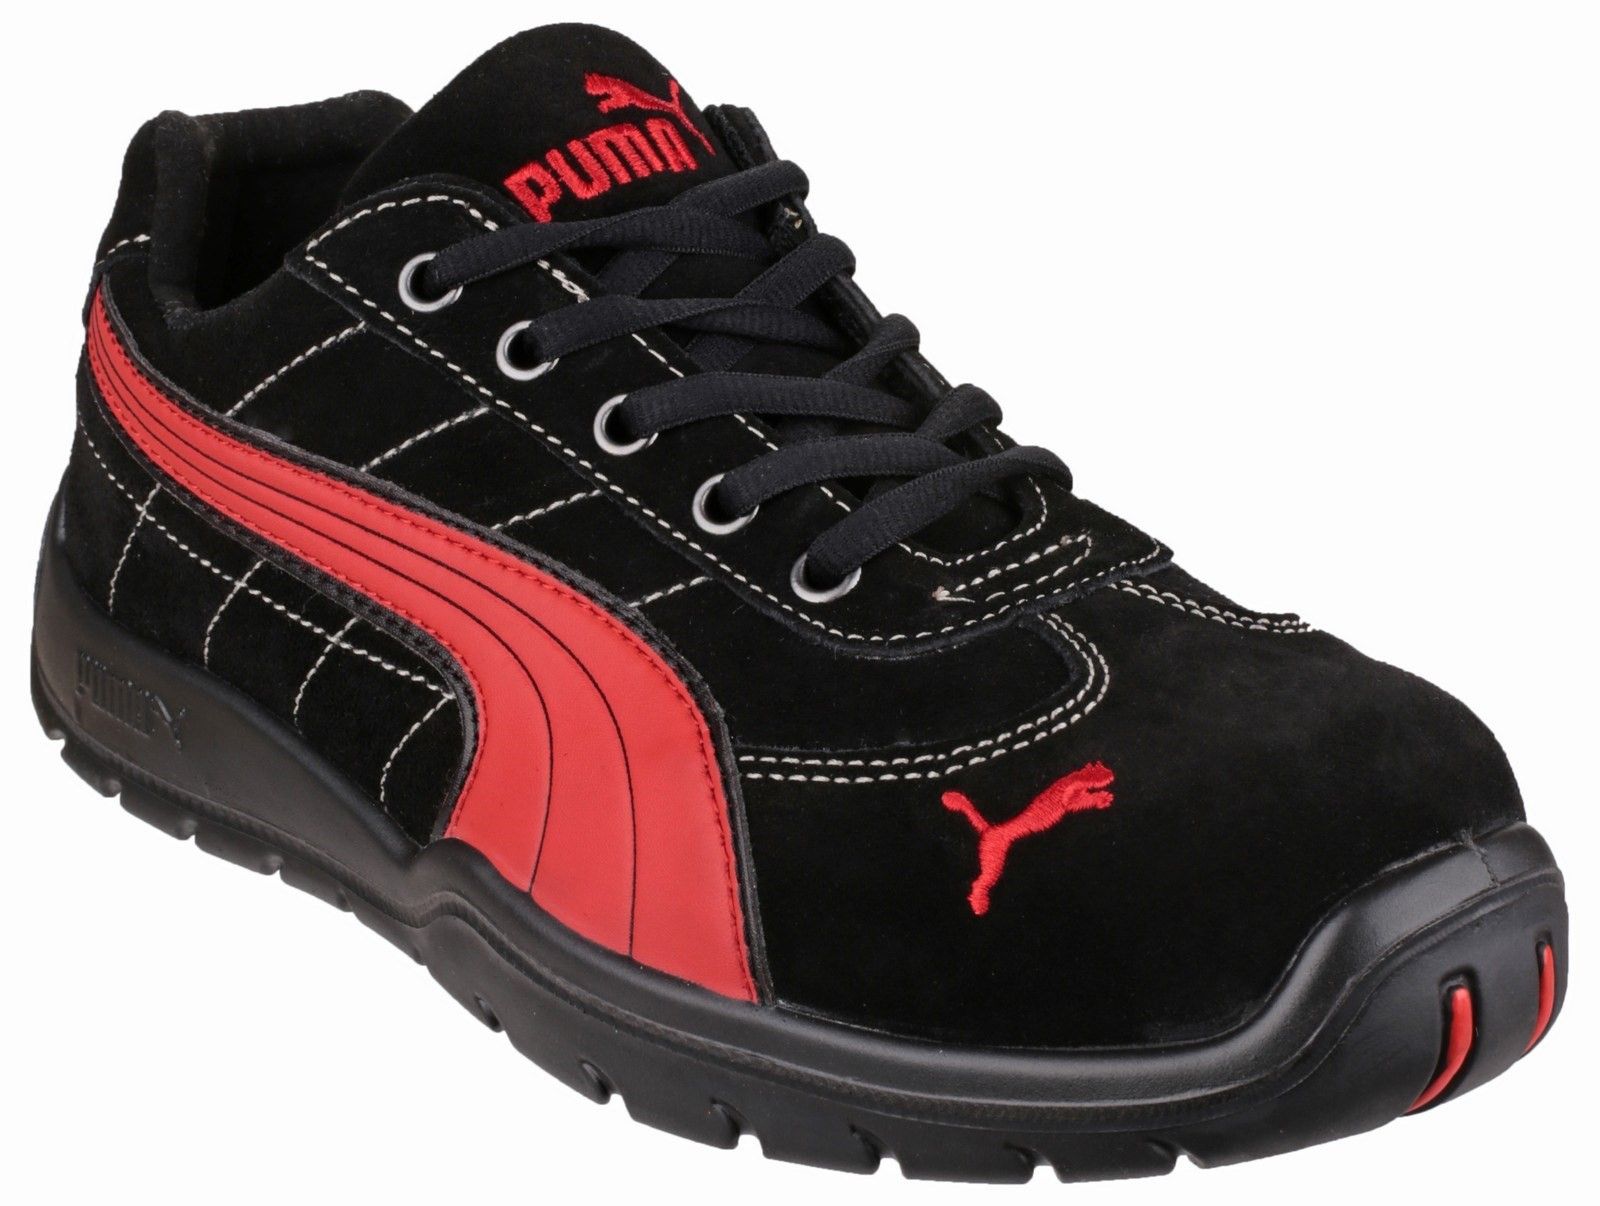 PUMA Silverstone Shoes. Style, protection and comfort for your daily work.Composite Cap flexible FAP midsole. 
Suede leather upper. 
BreathActive functional lining. 
Evercushion plus footbed. 
Rubber sole MOTO with Icell.